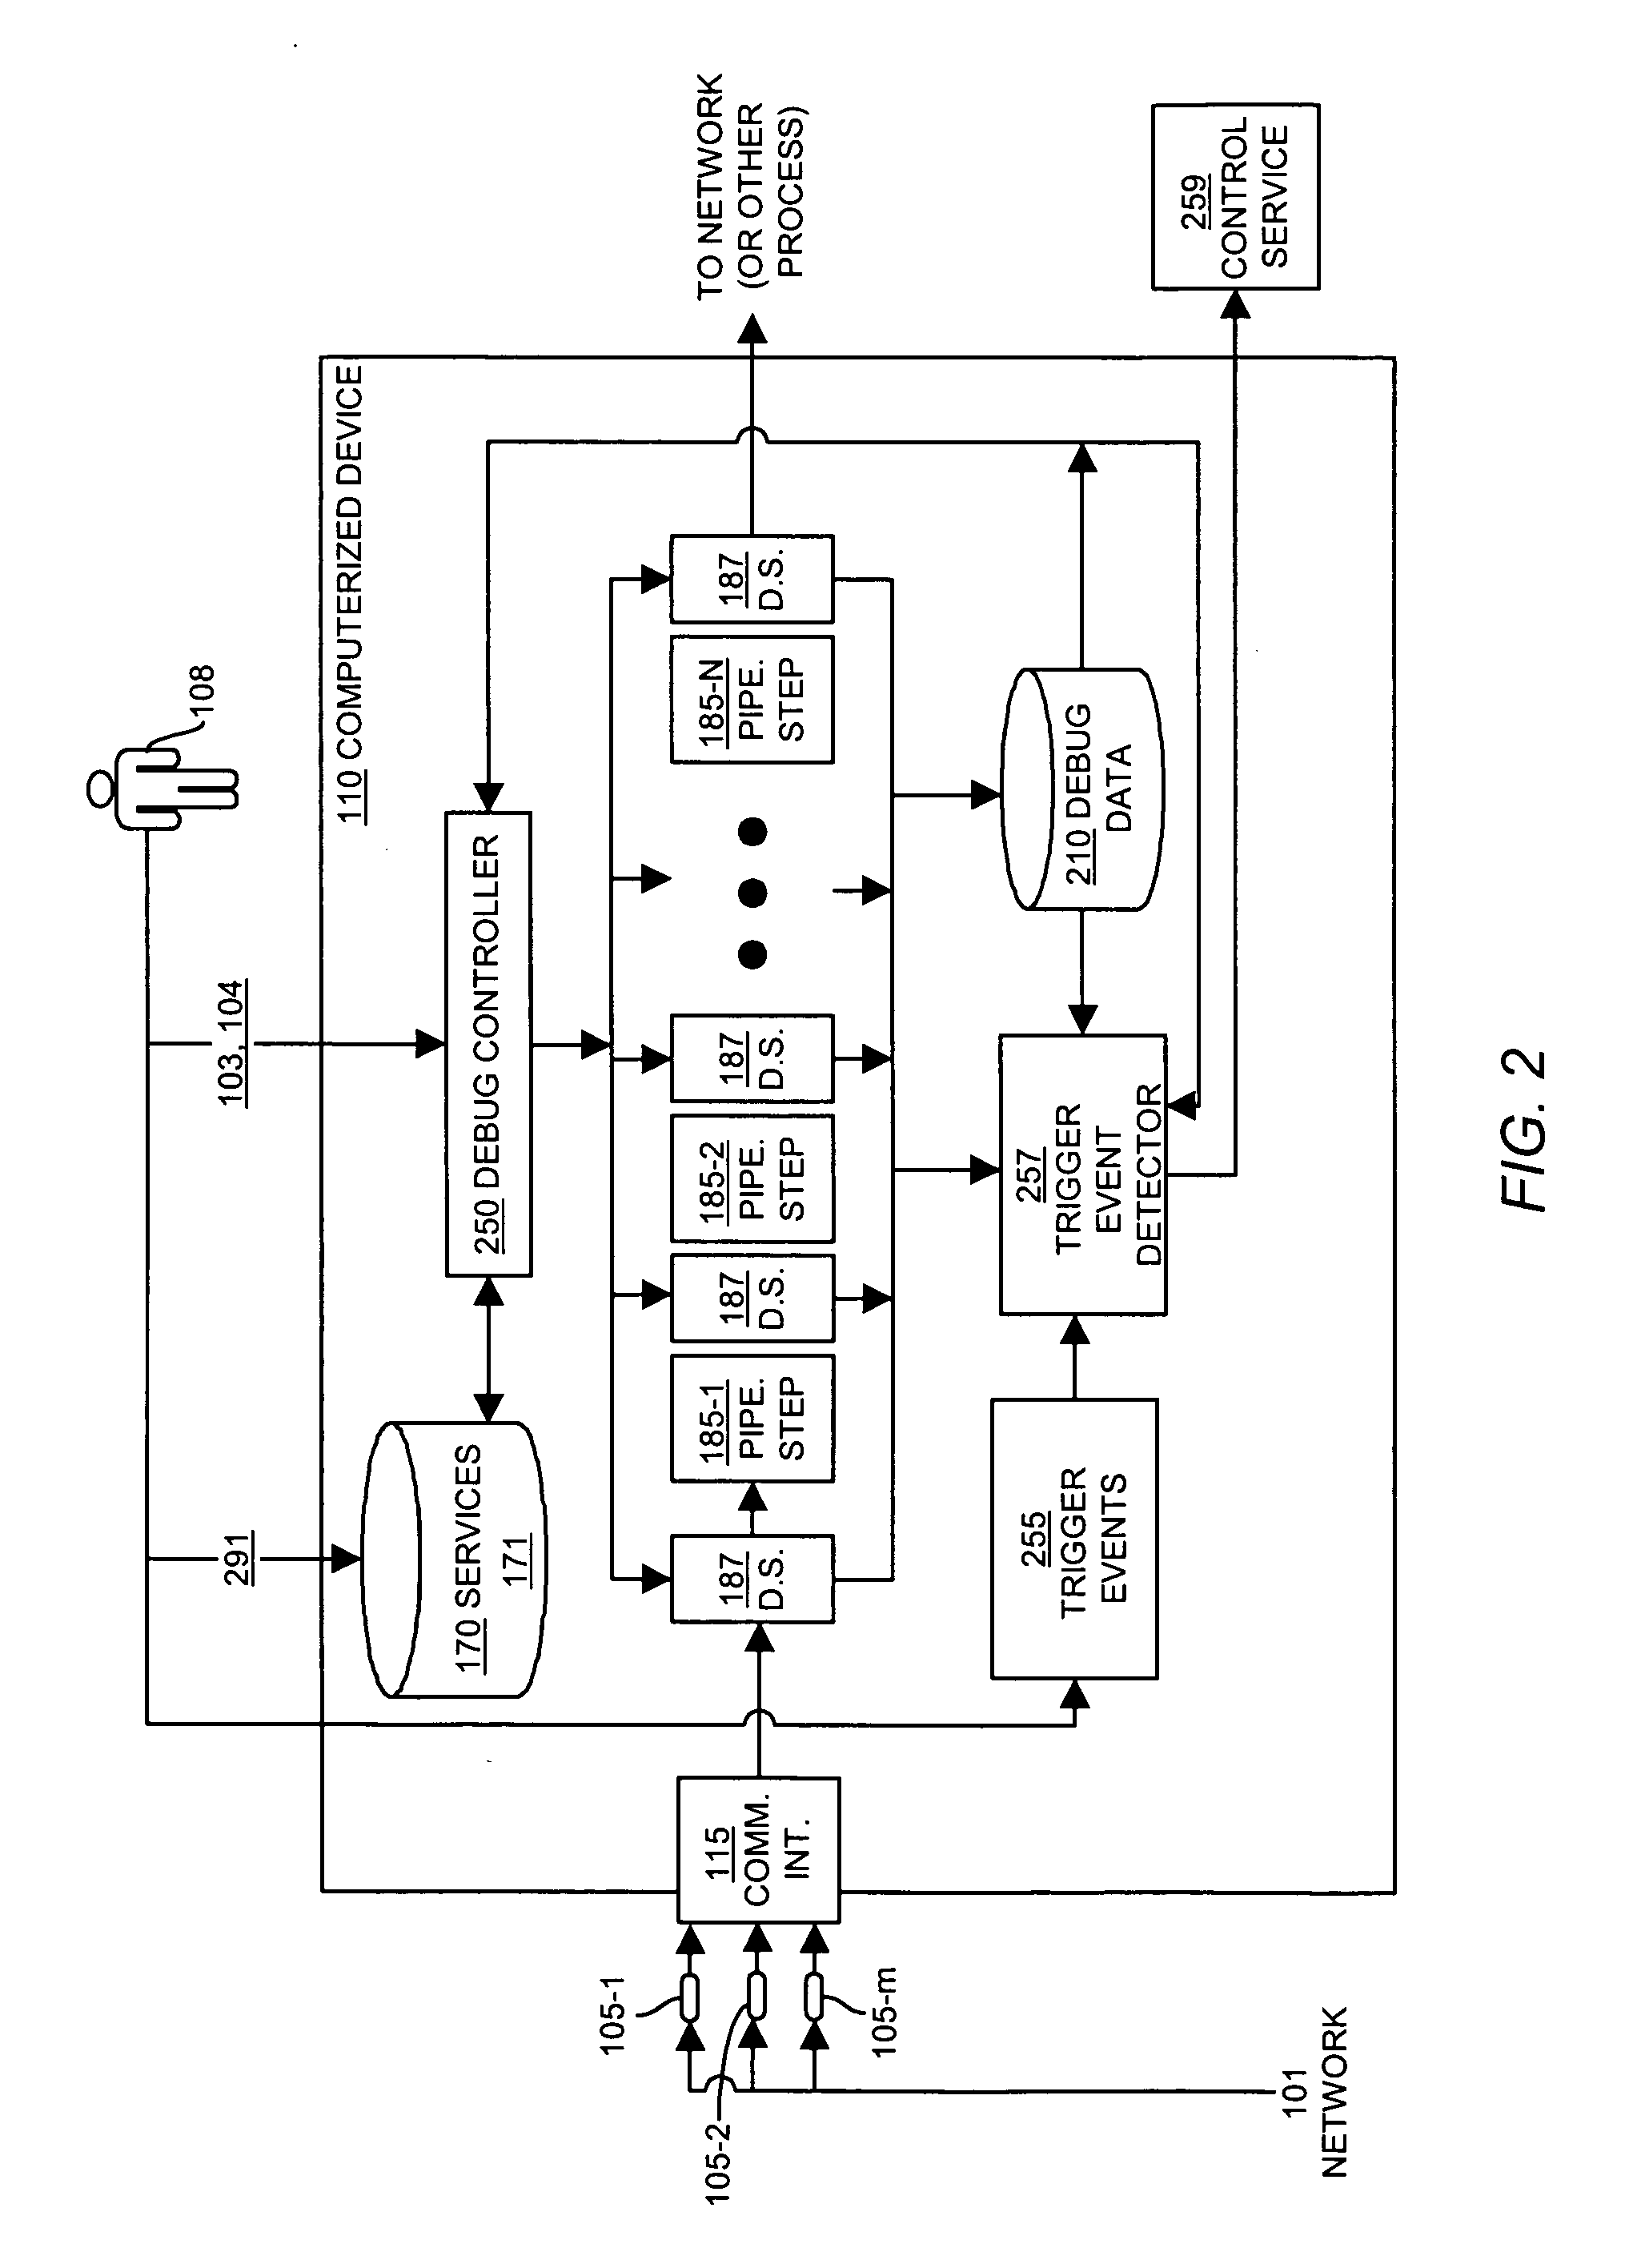 System, methods and apparatus for markup language debugging